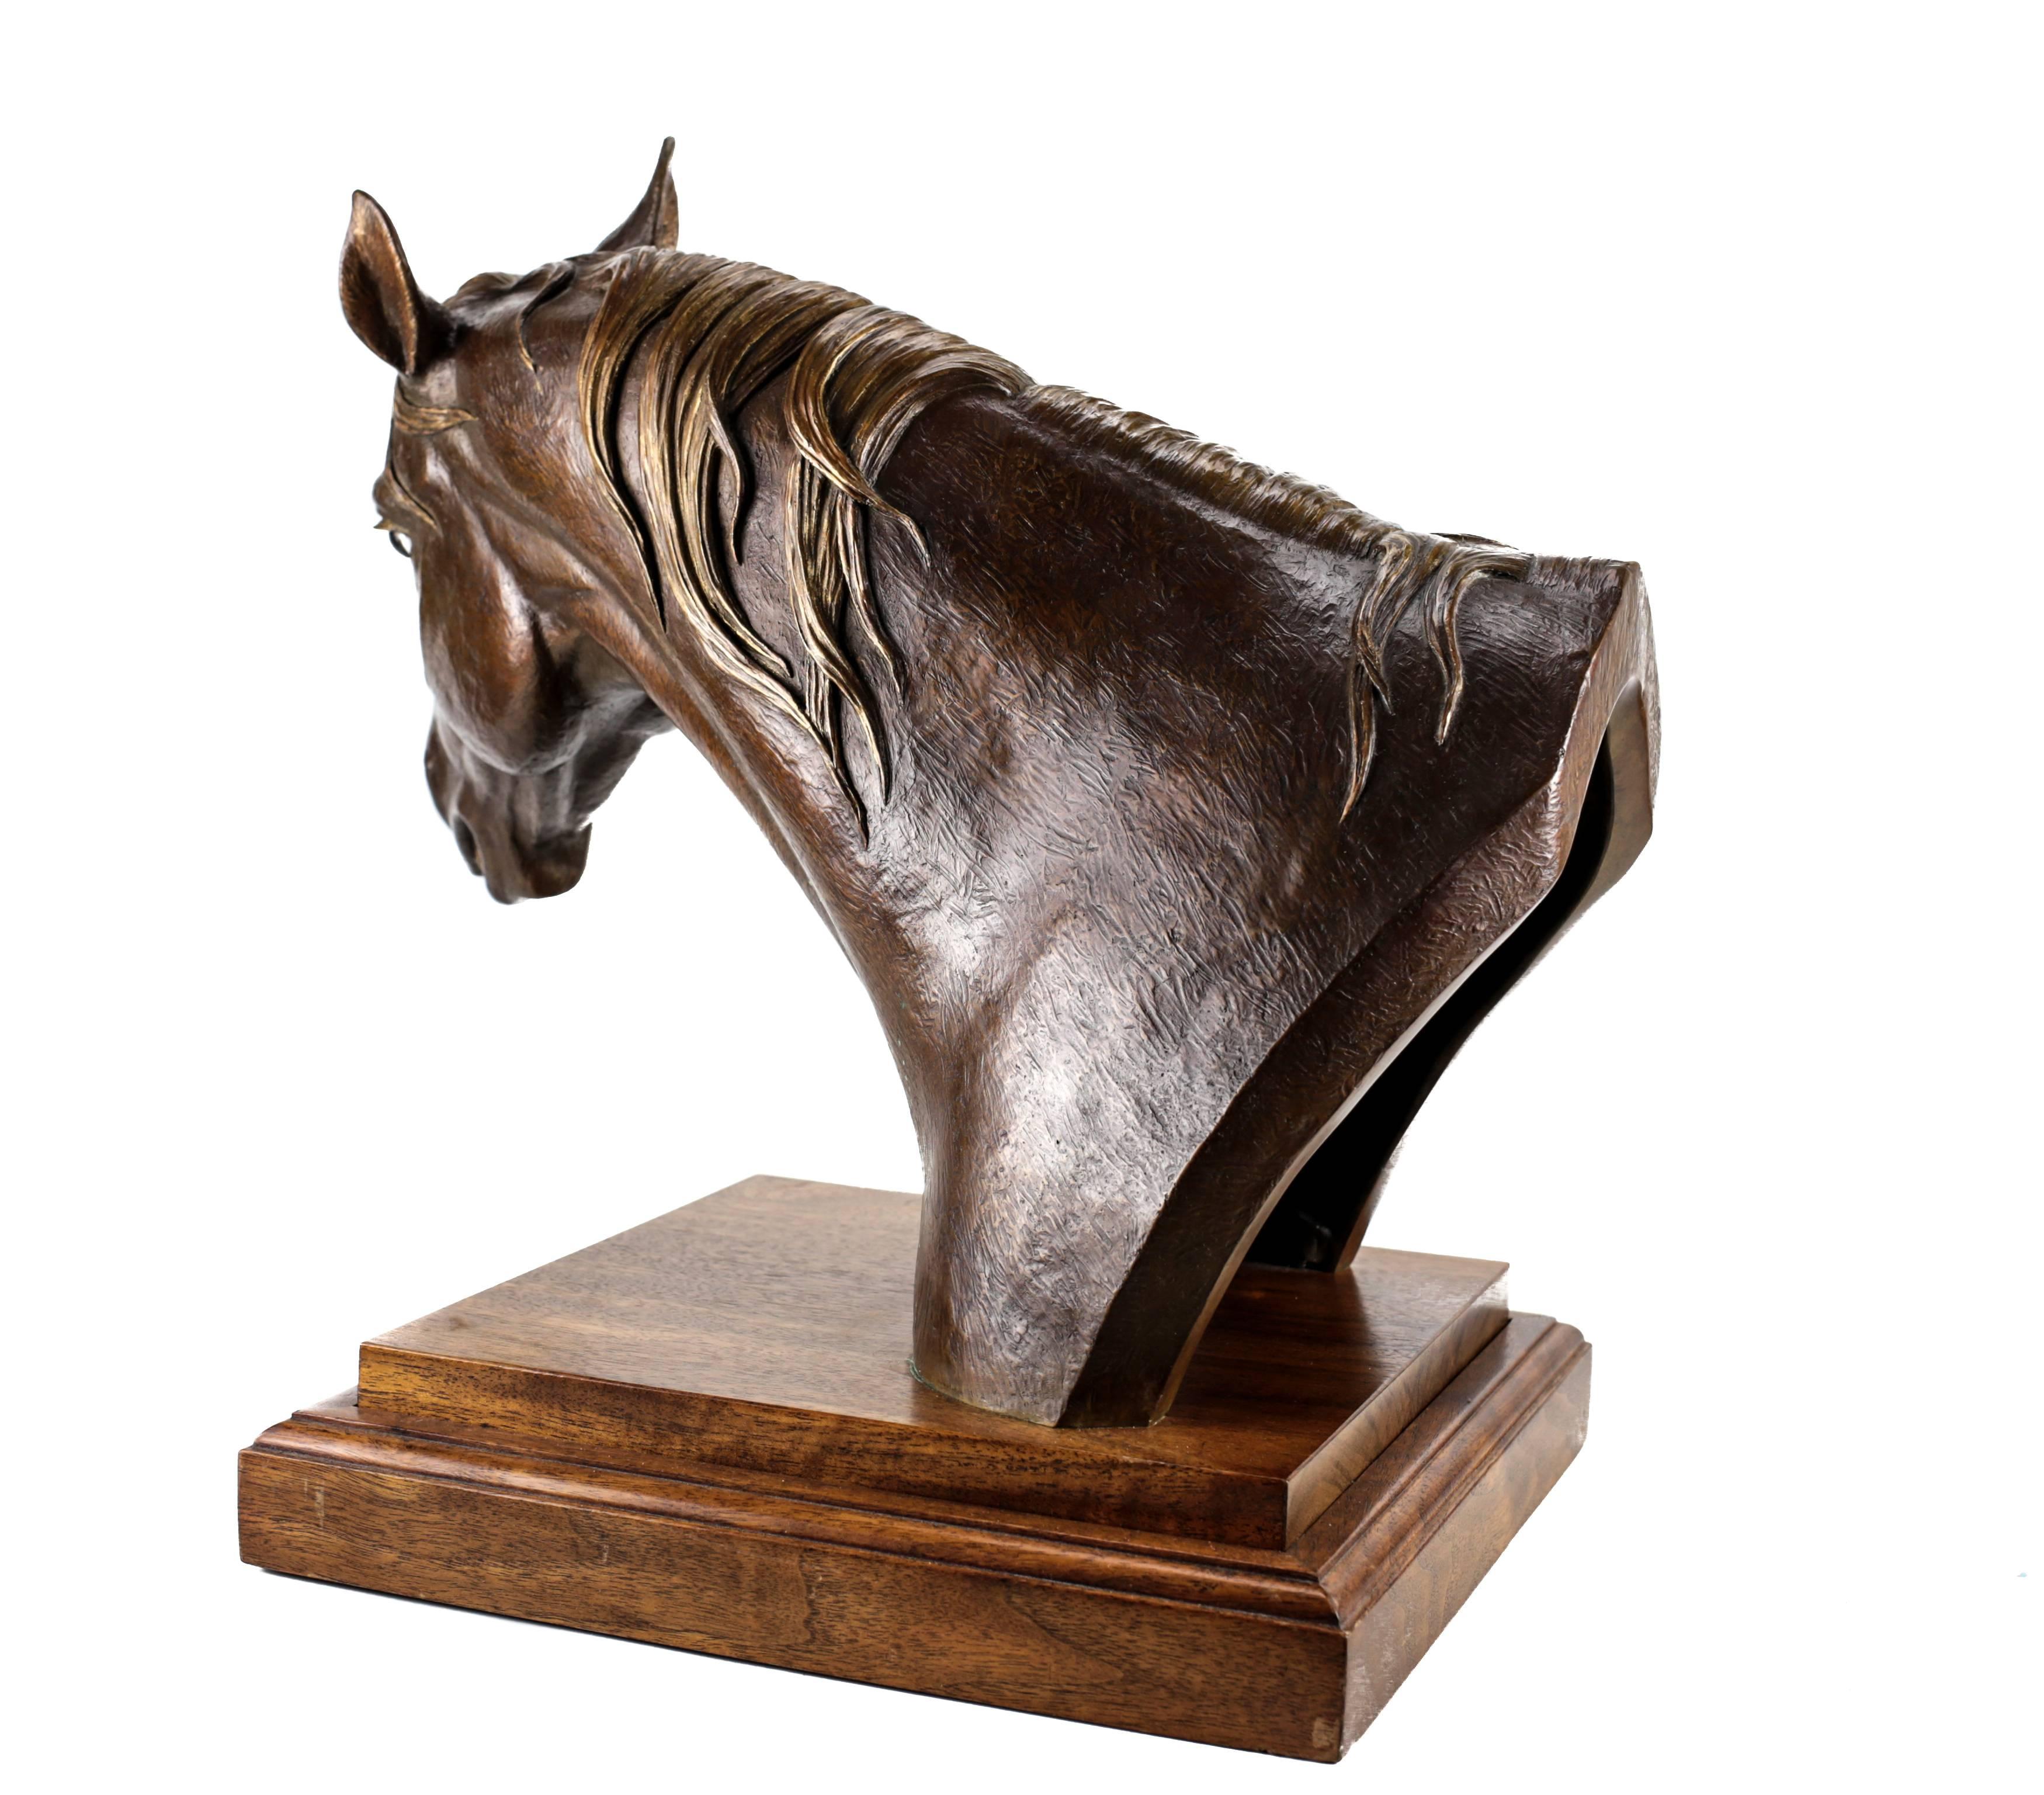 A realistically modelled patinated bronze sculpture of a horse by American artist Marilyn Newmark (1928-2013). The bust with a fine brushed and textured finish, along with the variations to the hair and eyelids, exude a life like character. 

Hand